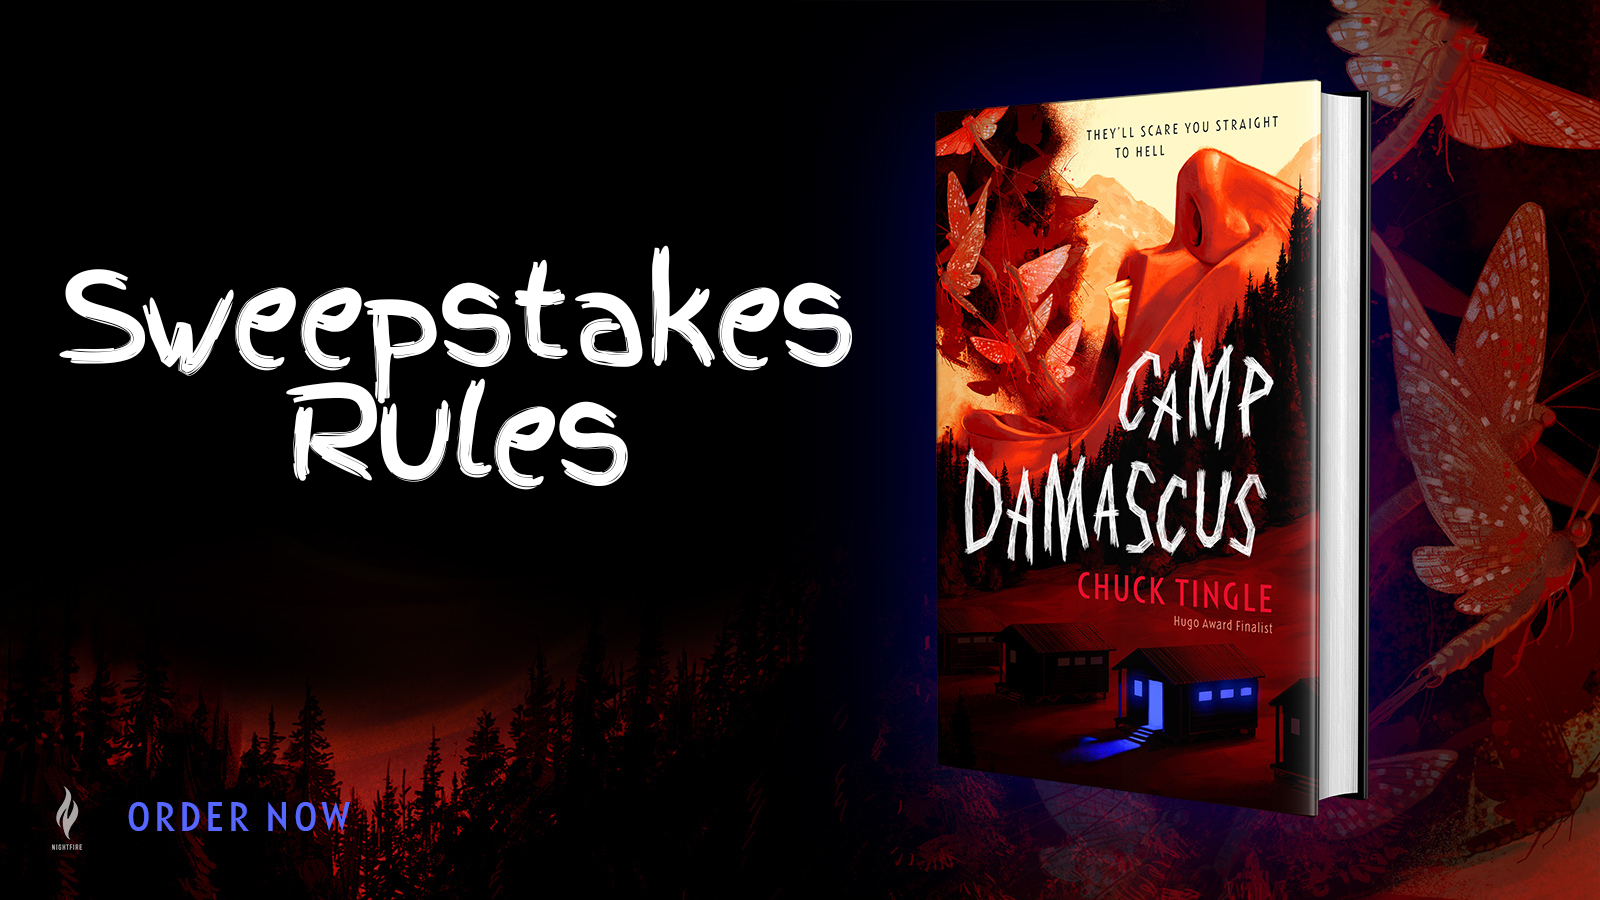 Camp Damascus Sweepstakes Rules - 825